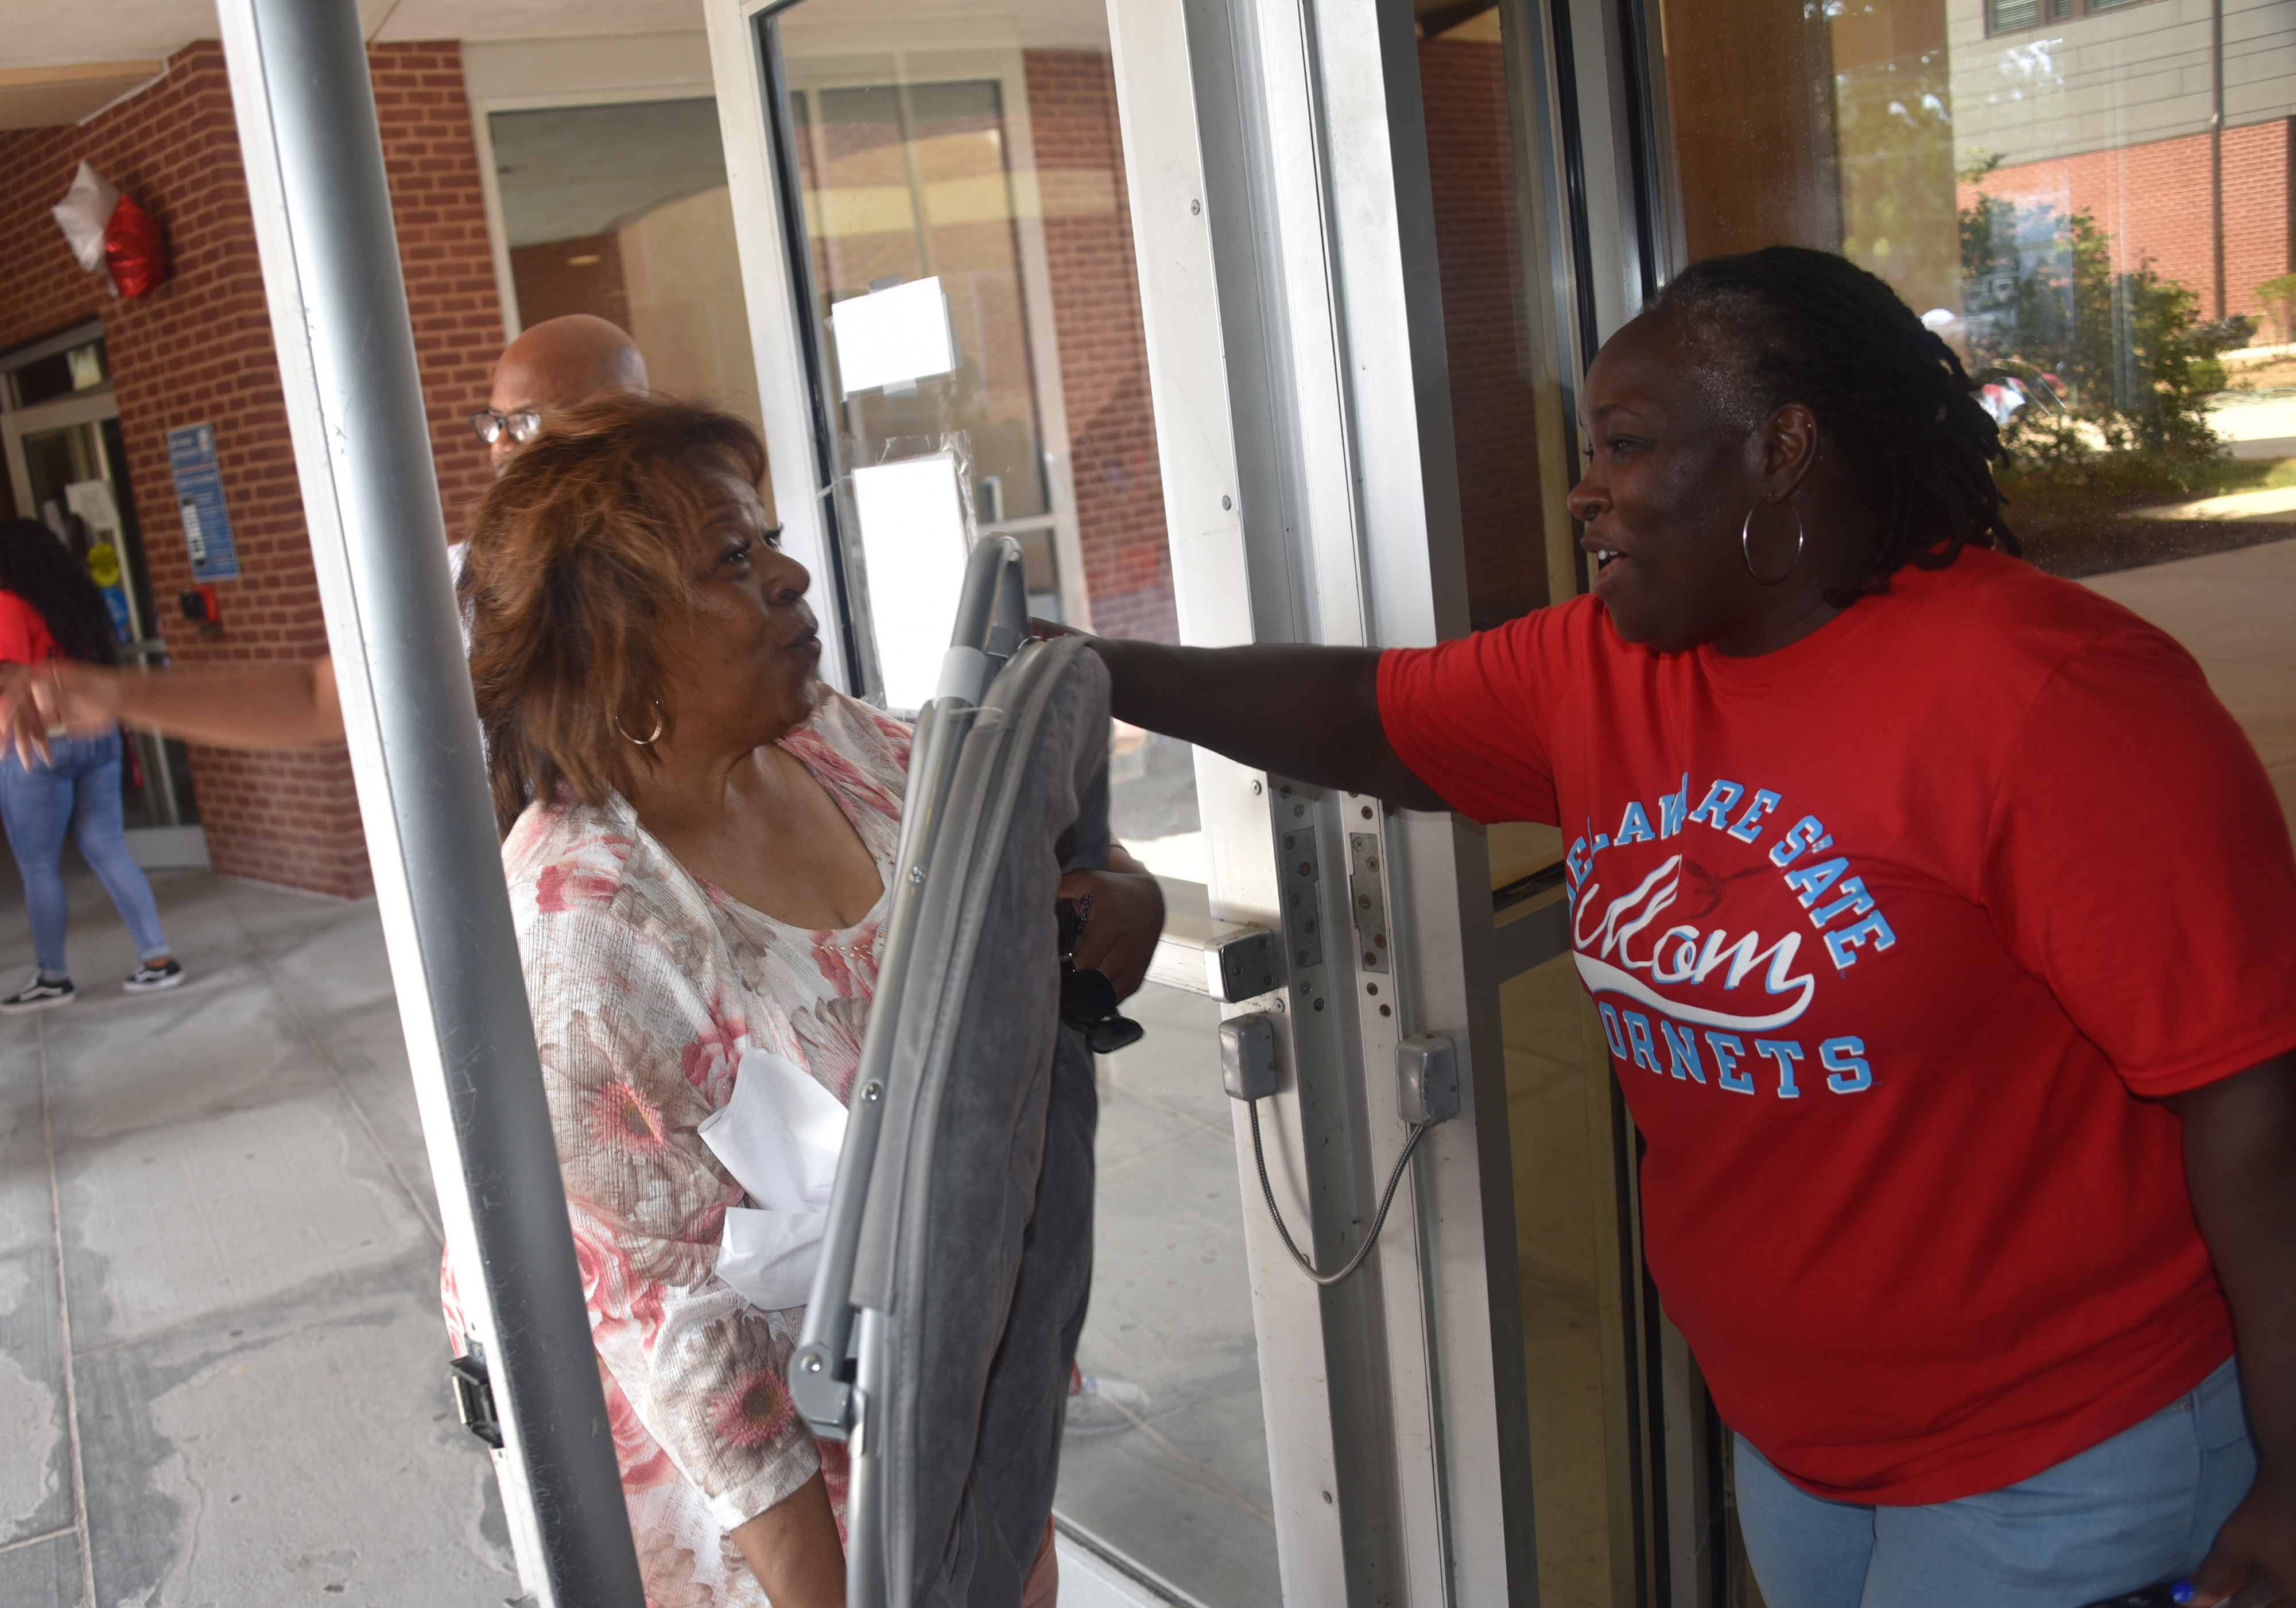 University President Wilma Mishoe even got into the volunteer work of helping students and the families move their belongings into the residential halls.